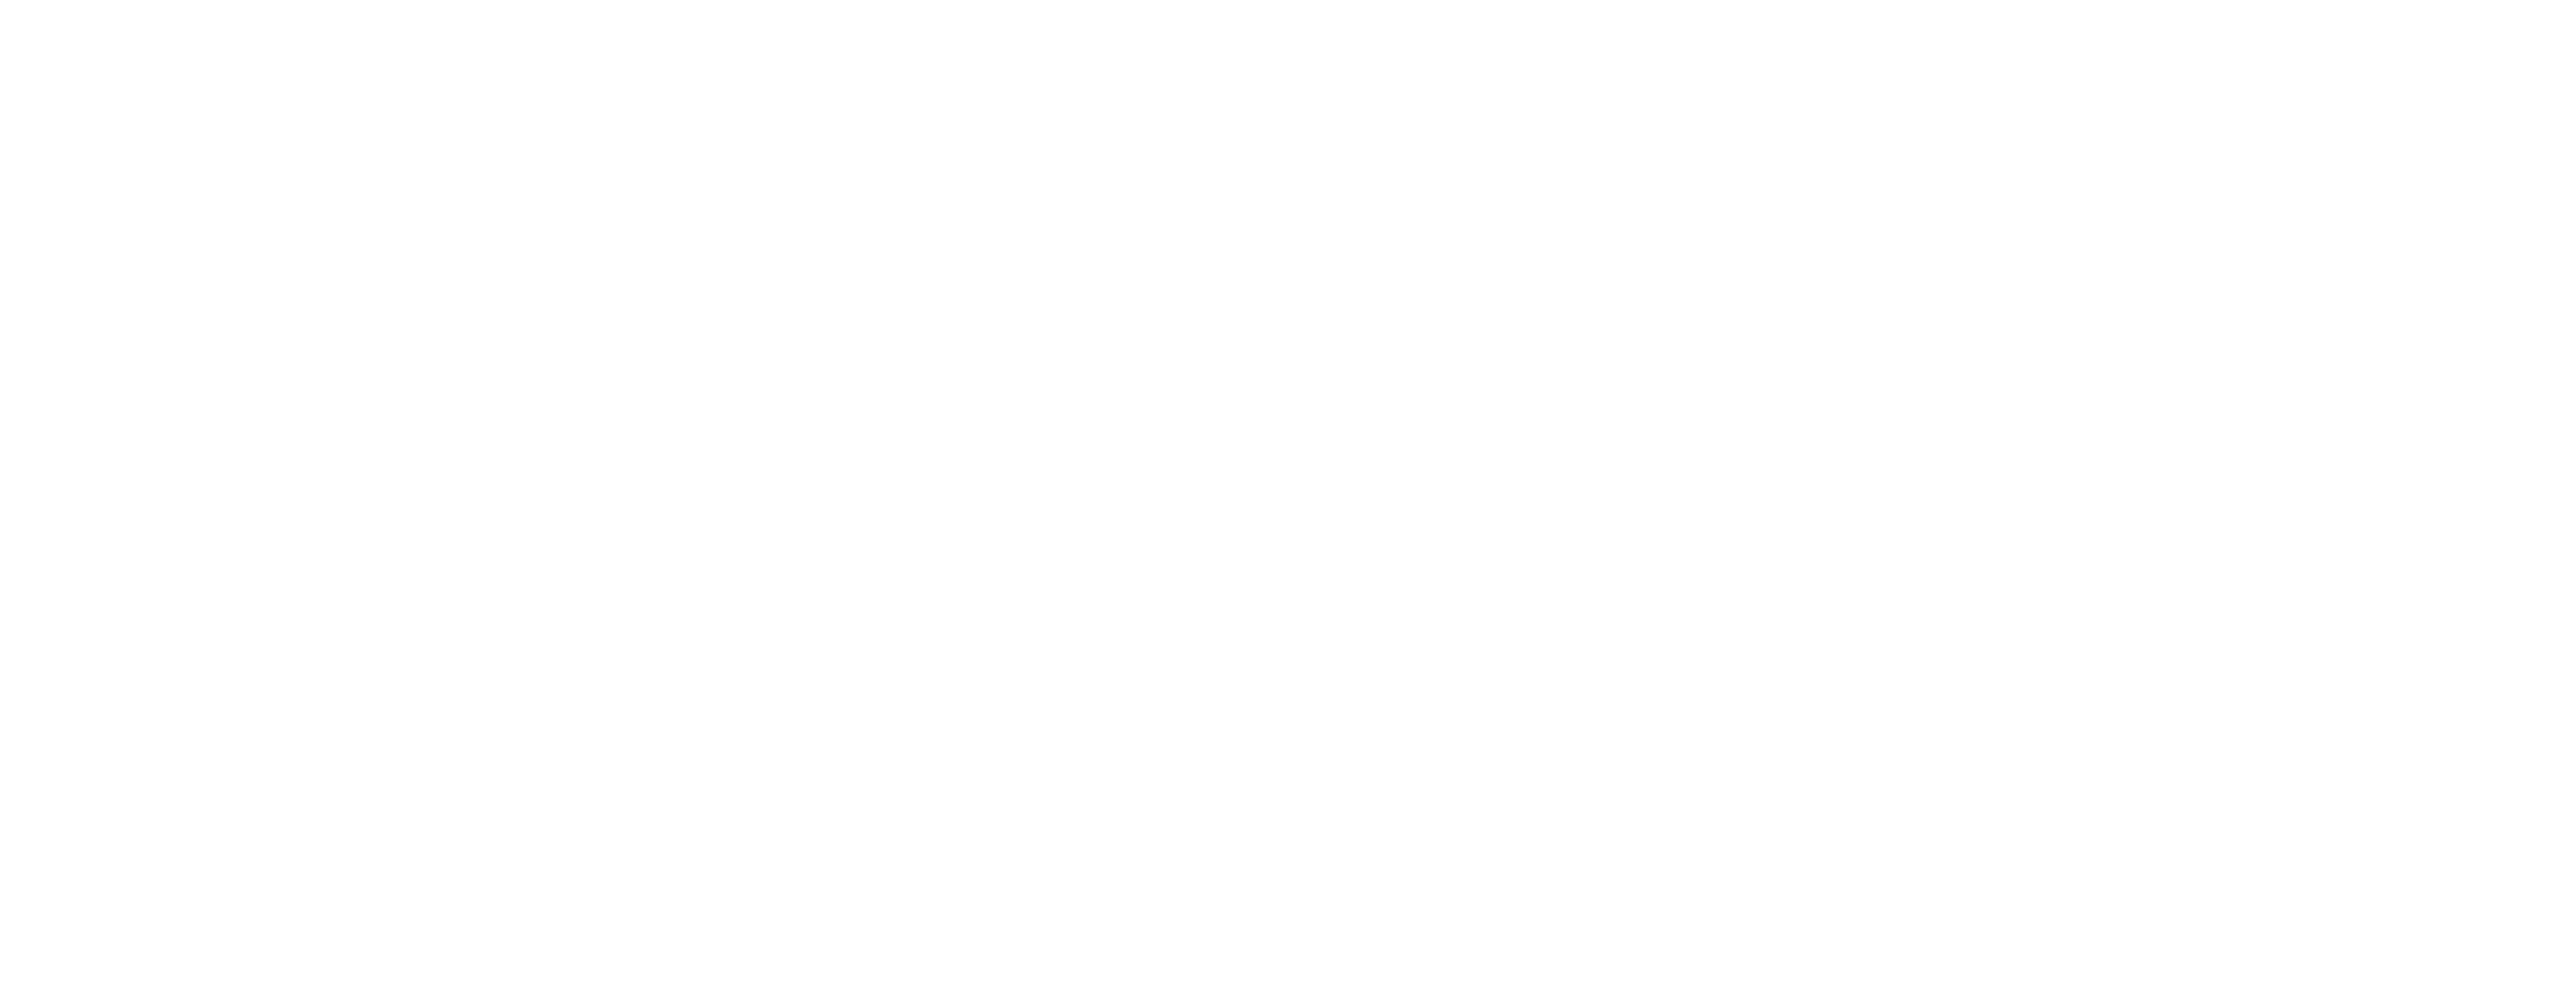 H4 Architects + Engineers